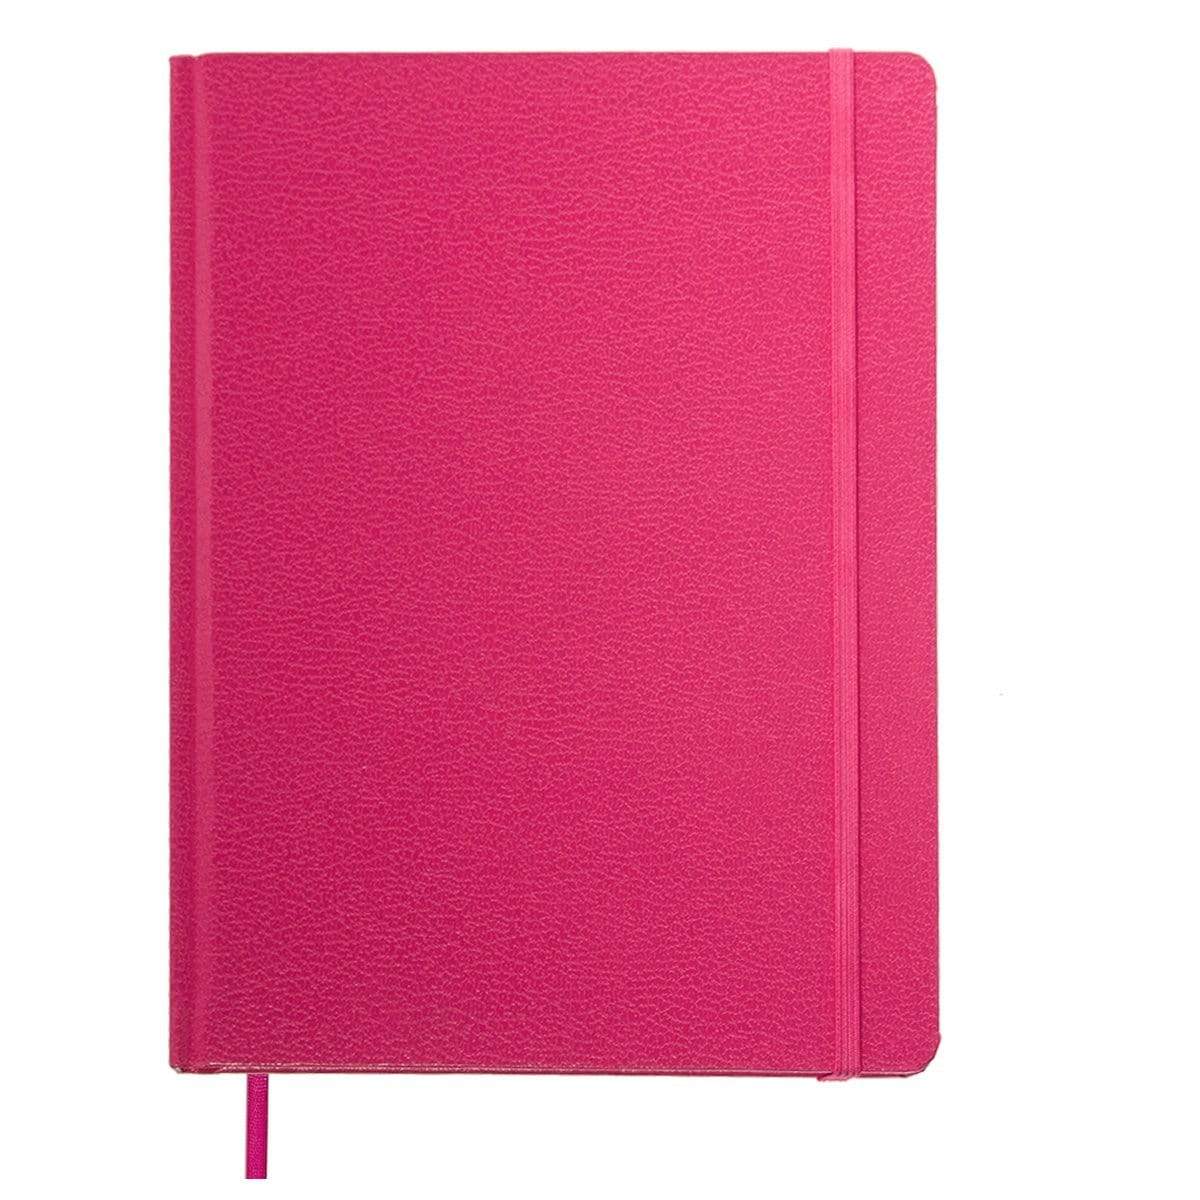 Select nice paper craft 4 pack 8 5 x 5 5 leatherette lined writing journals wide ruled banded notebook with ribbon bookmark pink a5 size